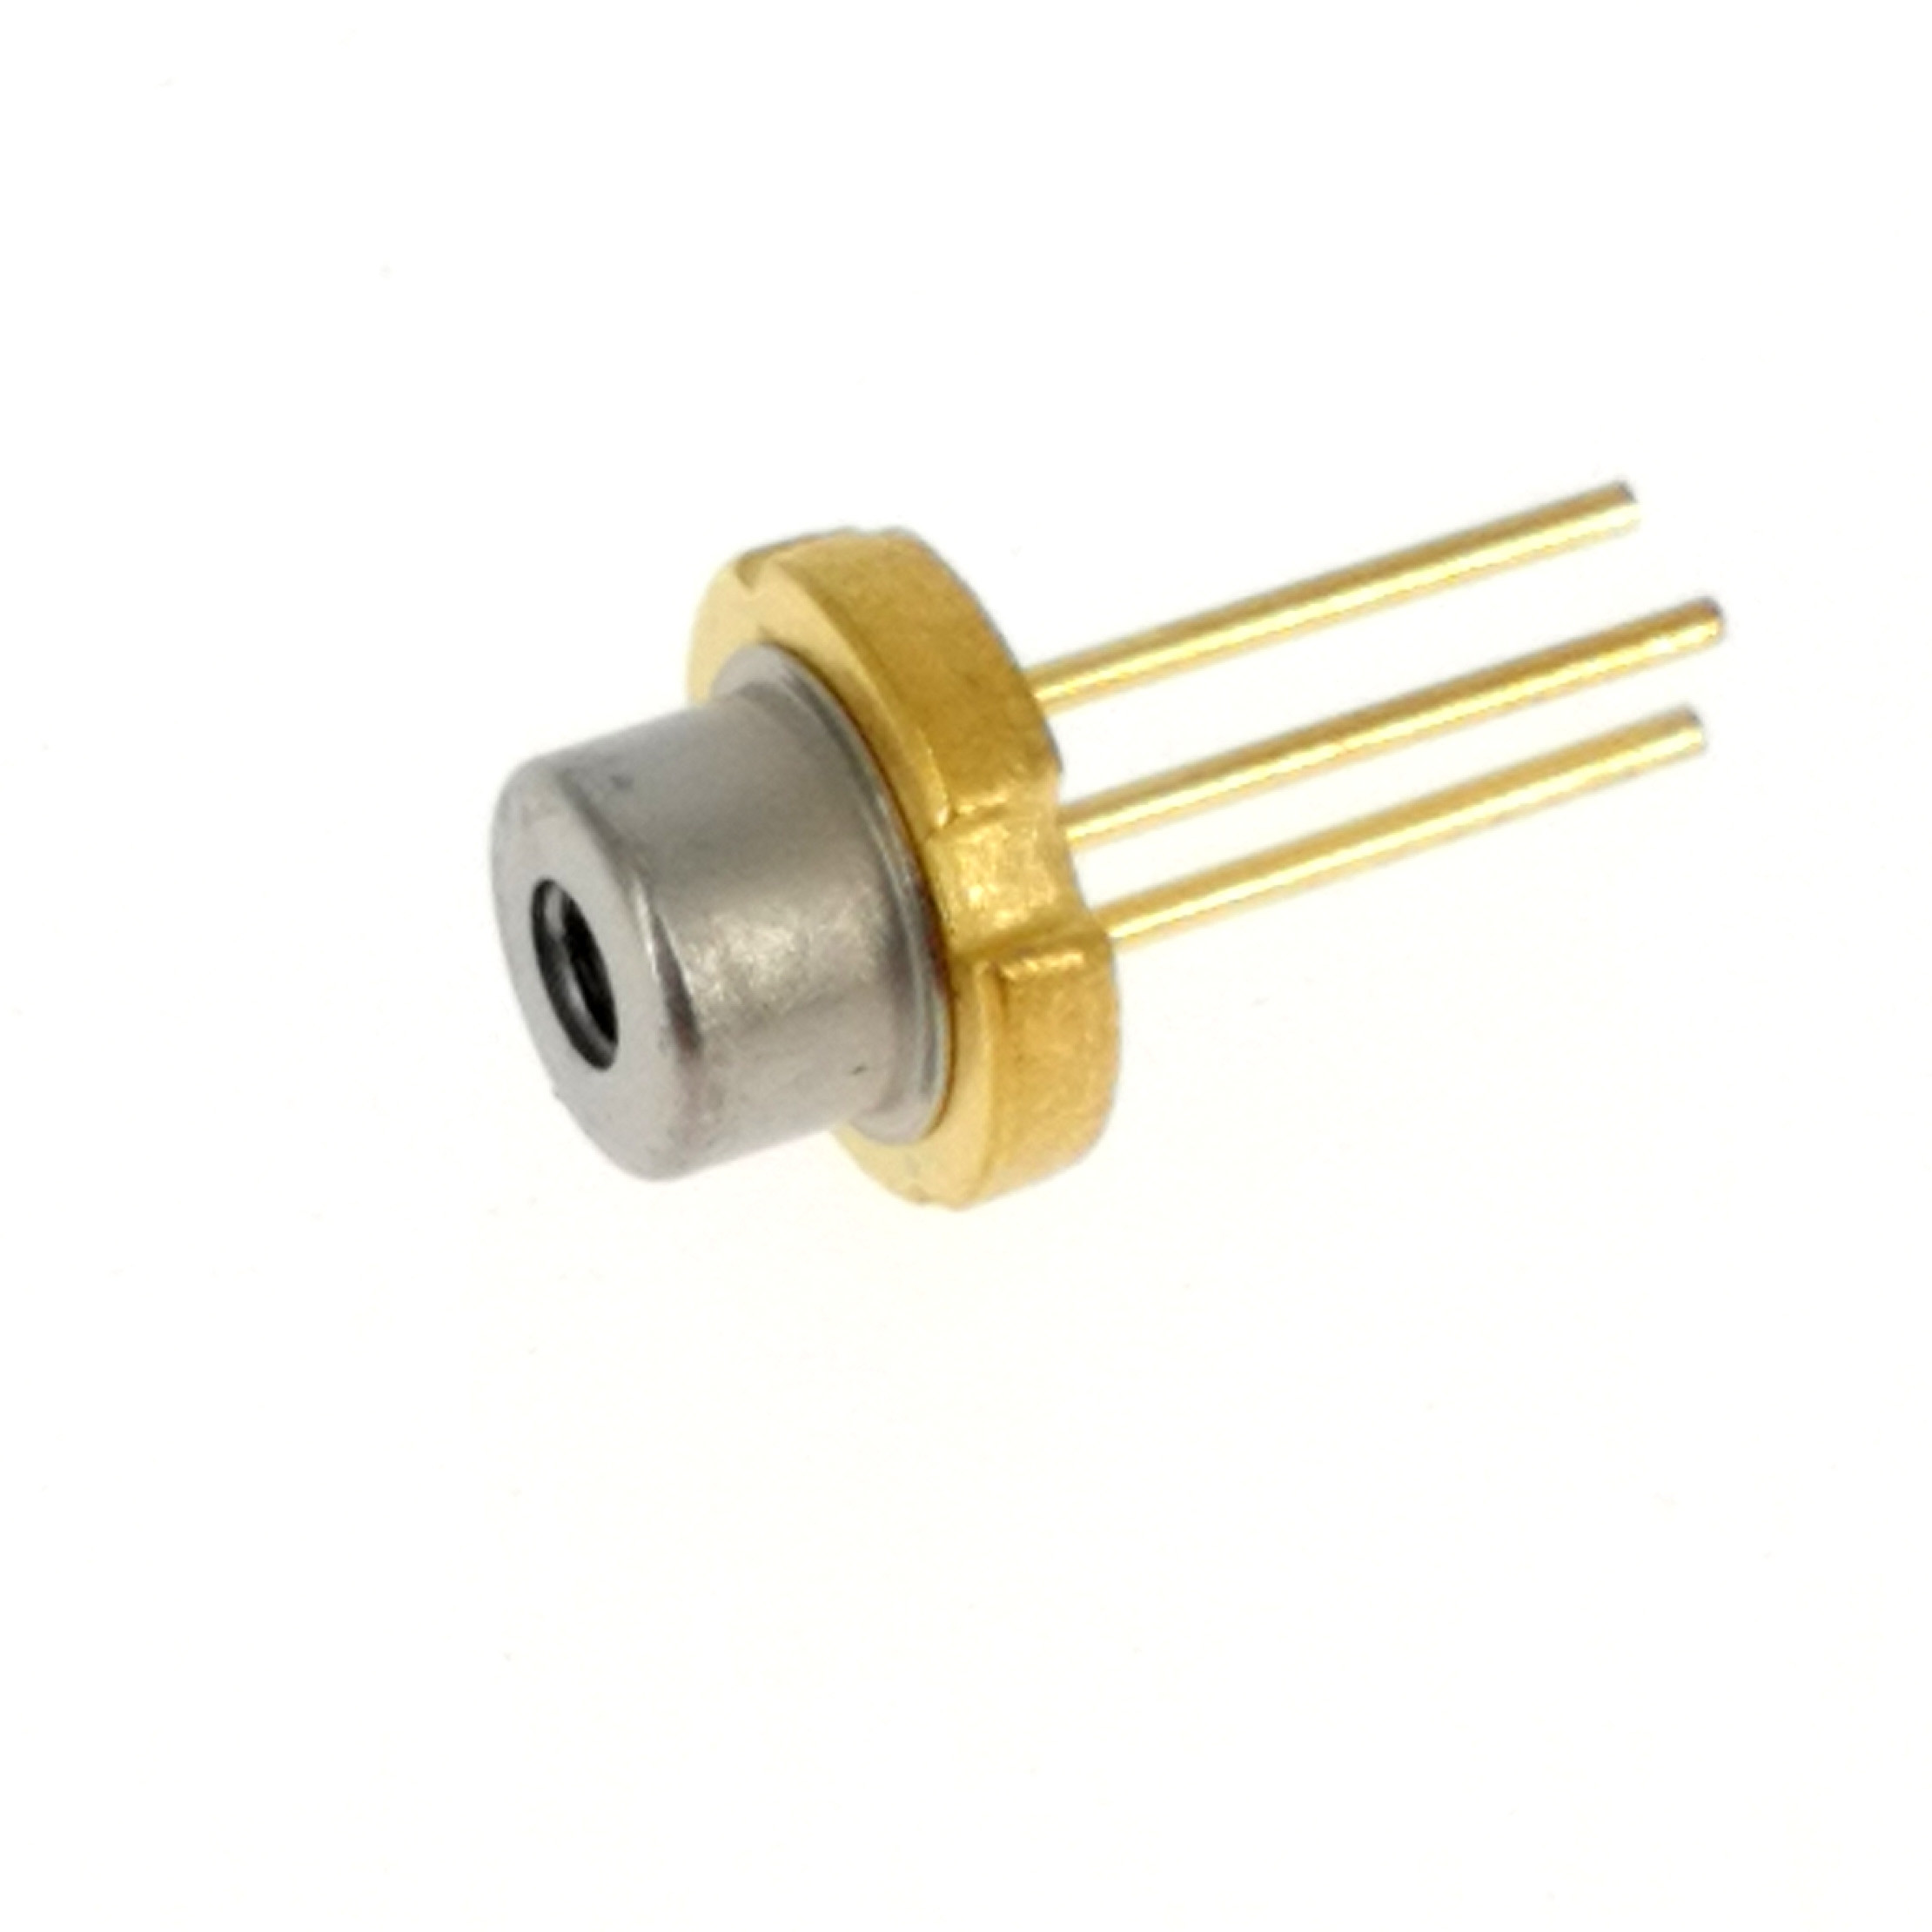 5.6mm 980nm 300mw No pd Infrared Laser Diode multi-mode